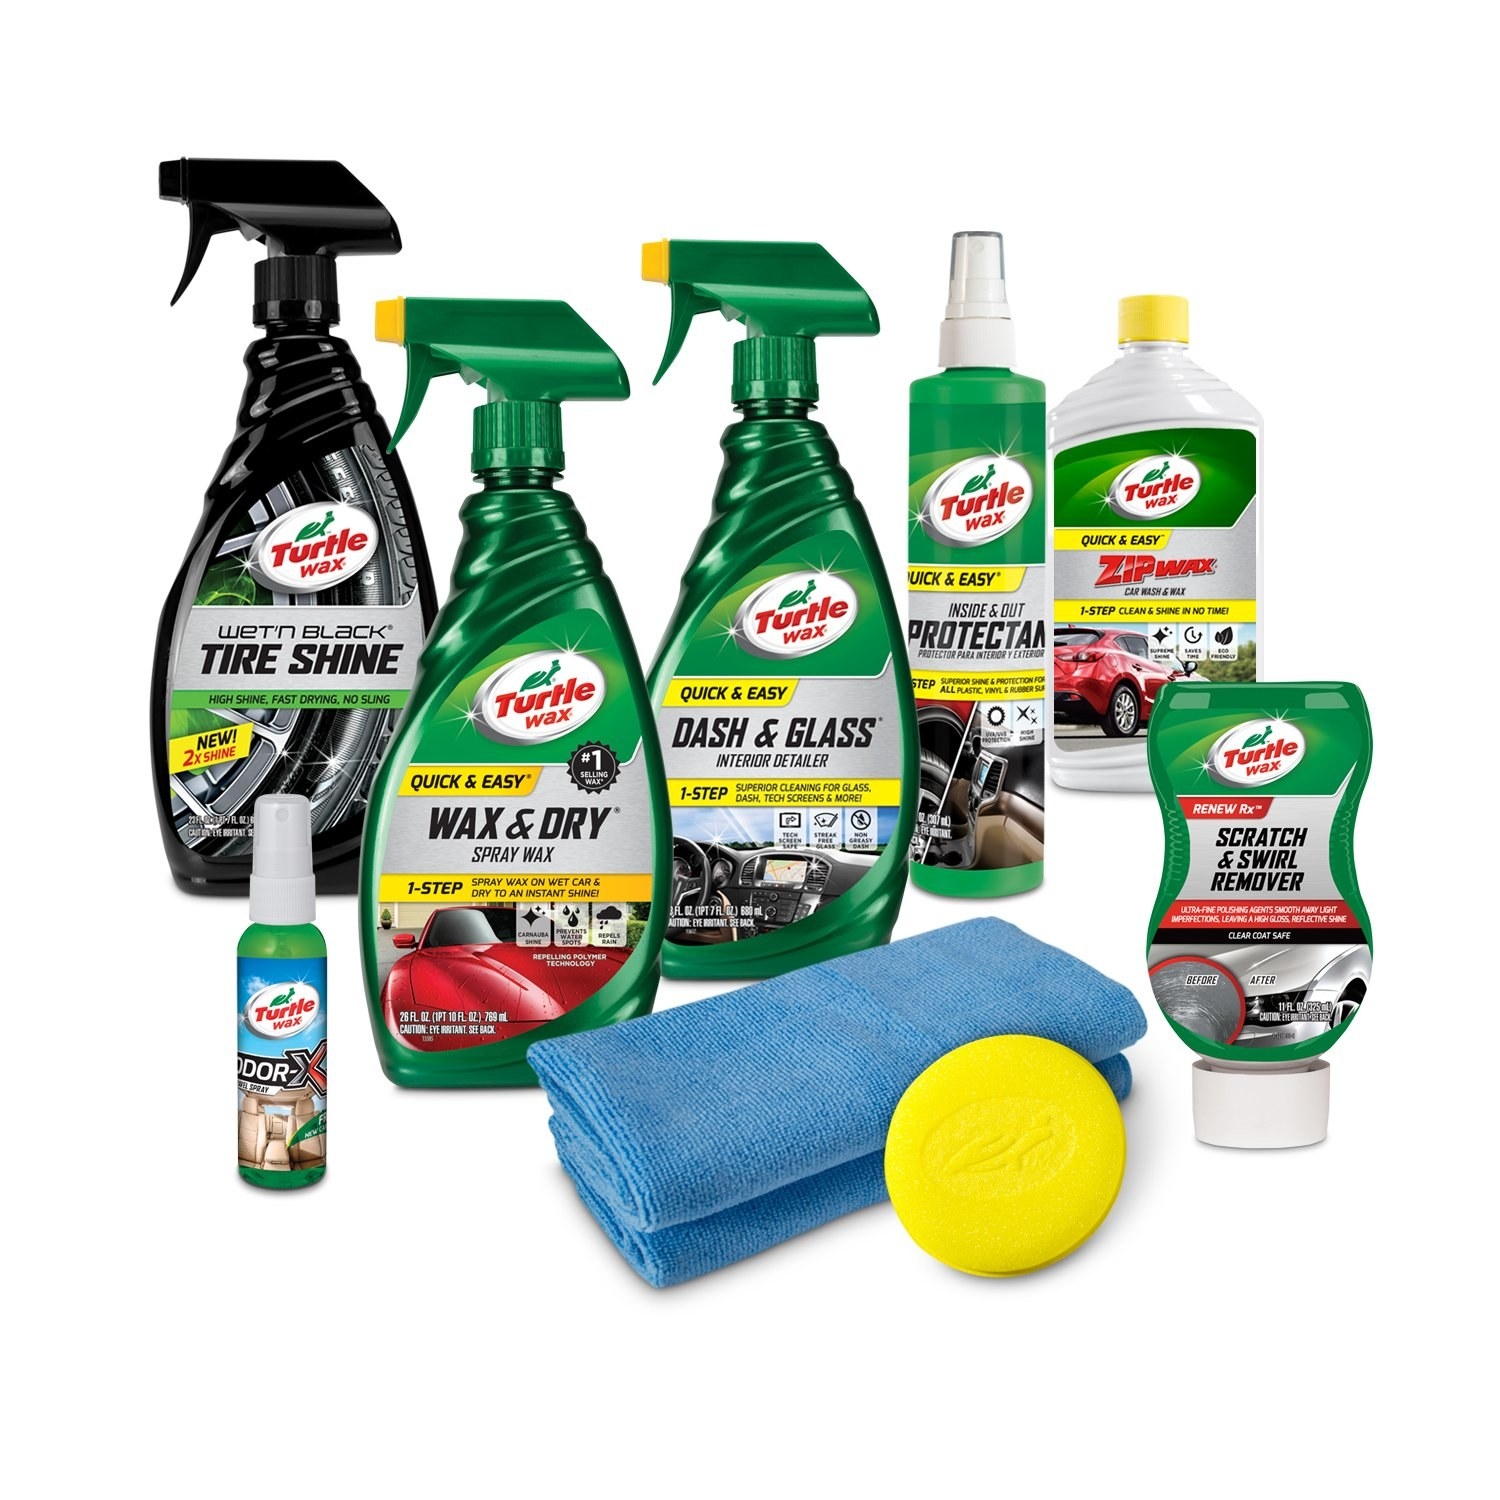 all of the items included in the car cleaning kit